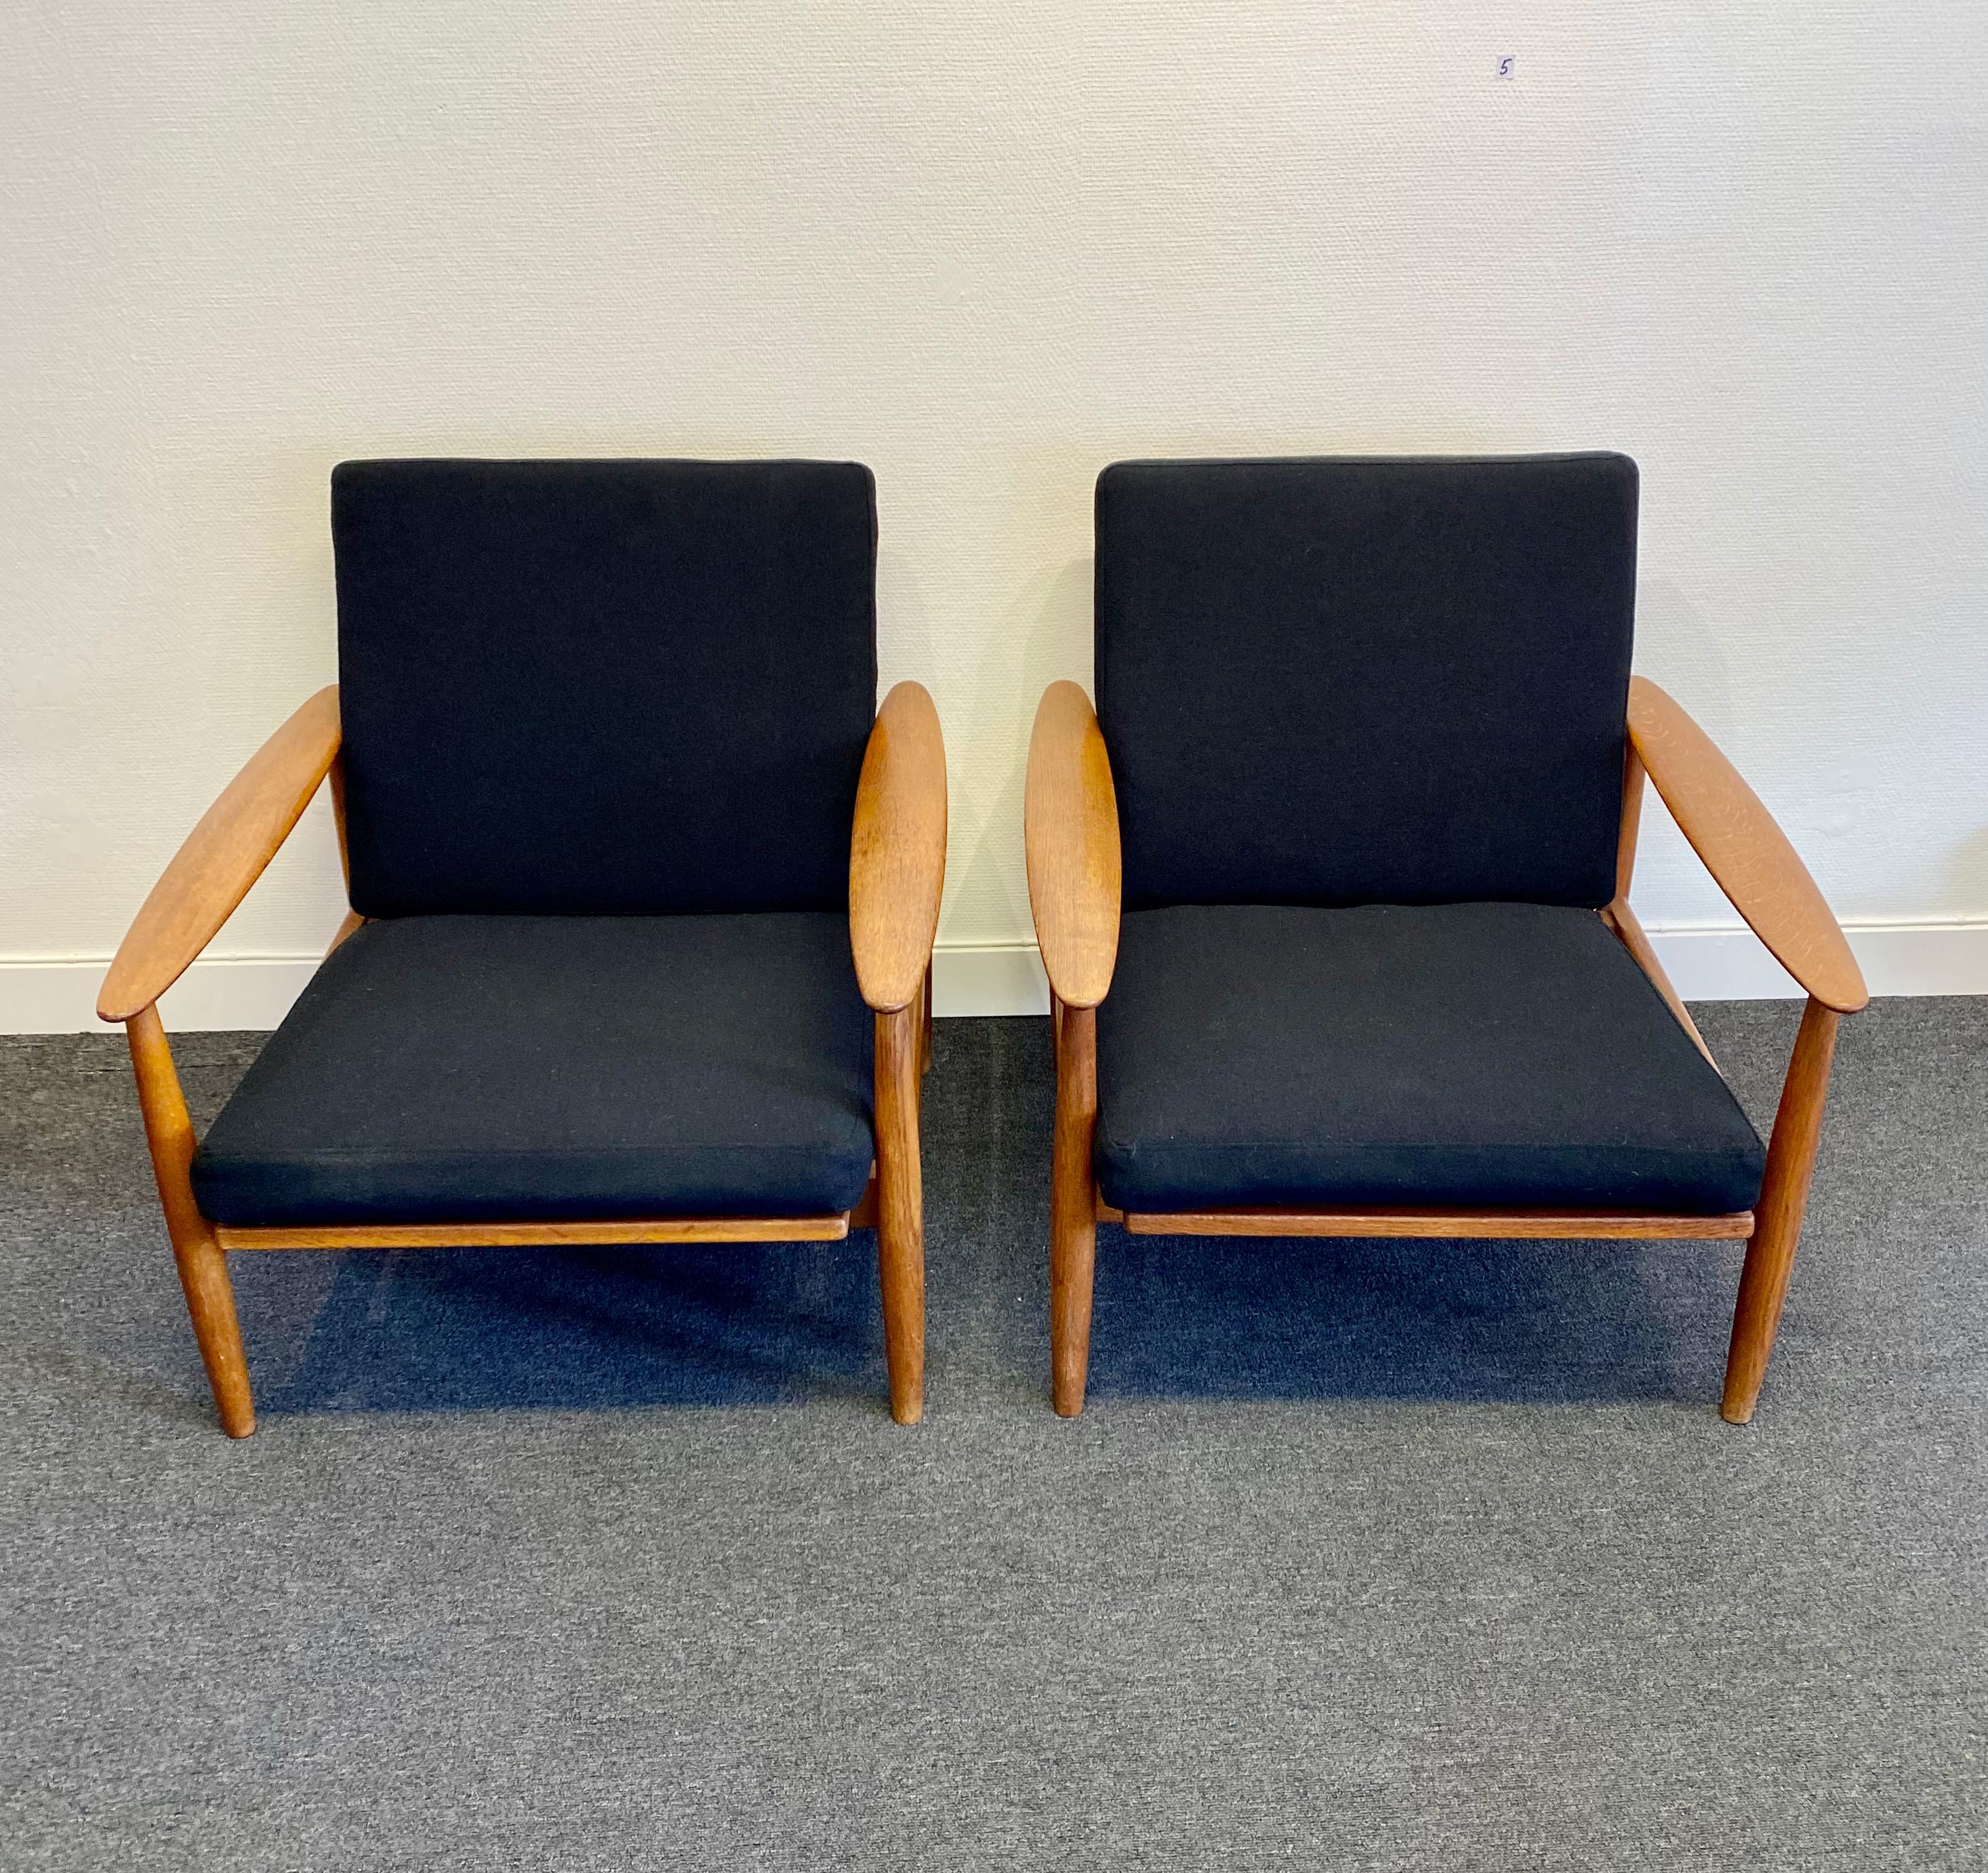 A set of 2 lounge chairs made in Denmark. Teak. Marked BM 8 with a red stamp underneath. New quality woolen fabric upholstery. Excellent vintage condition.